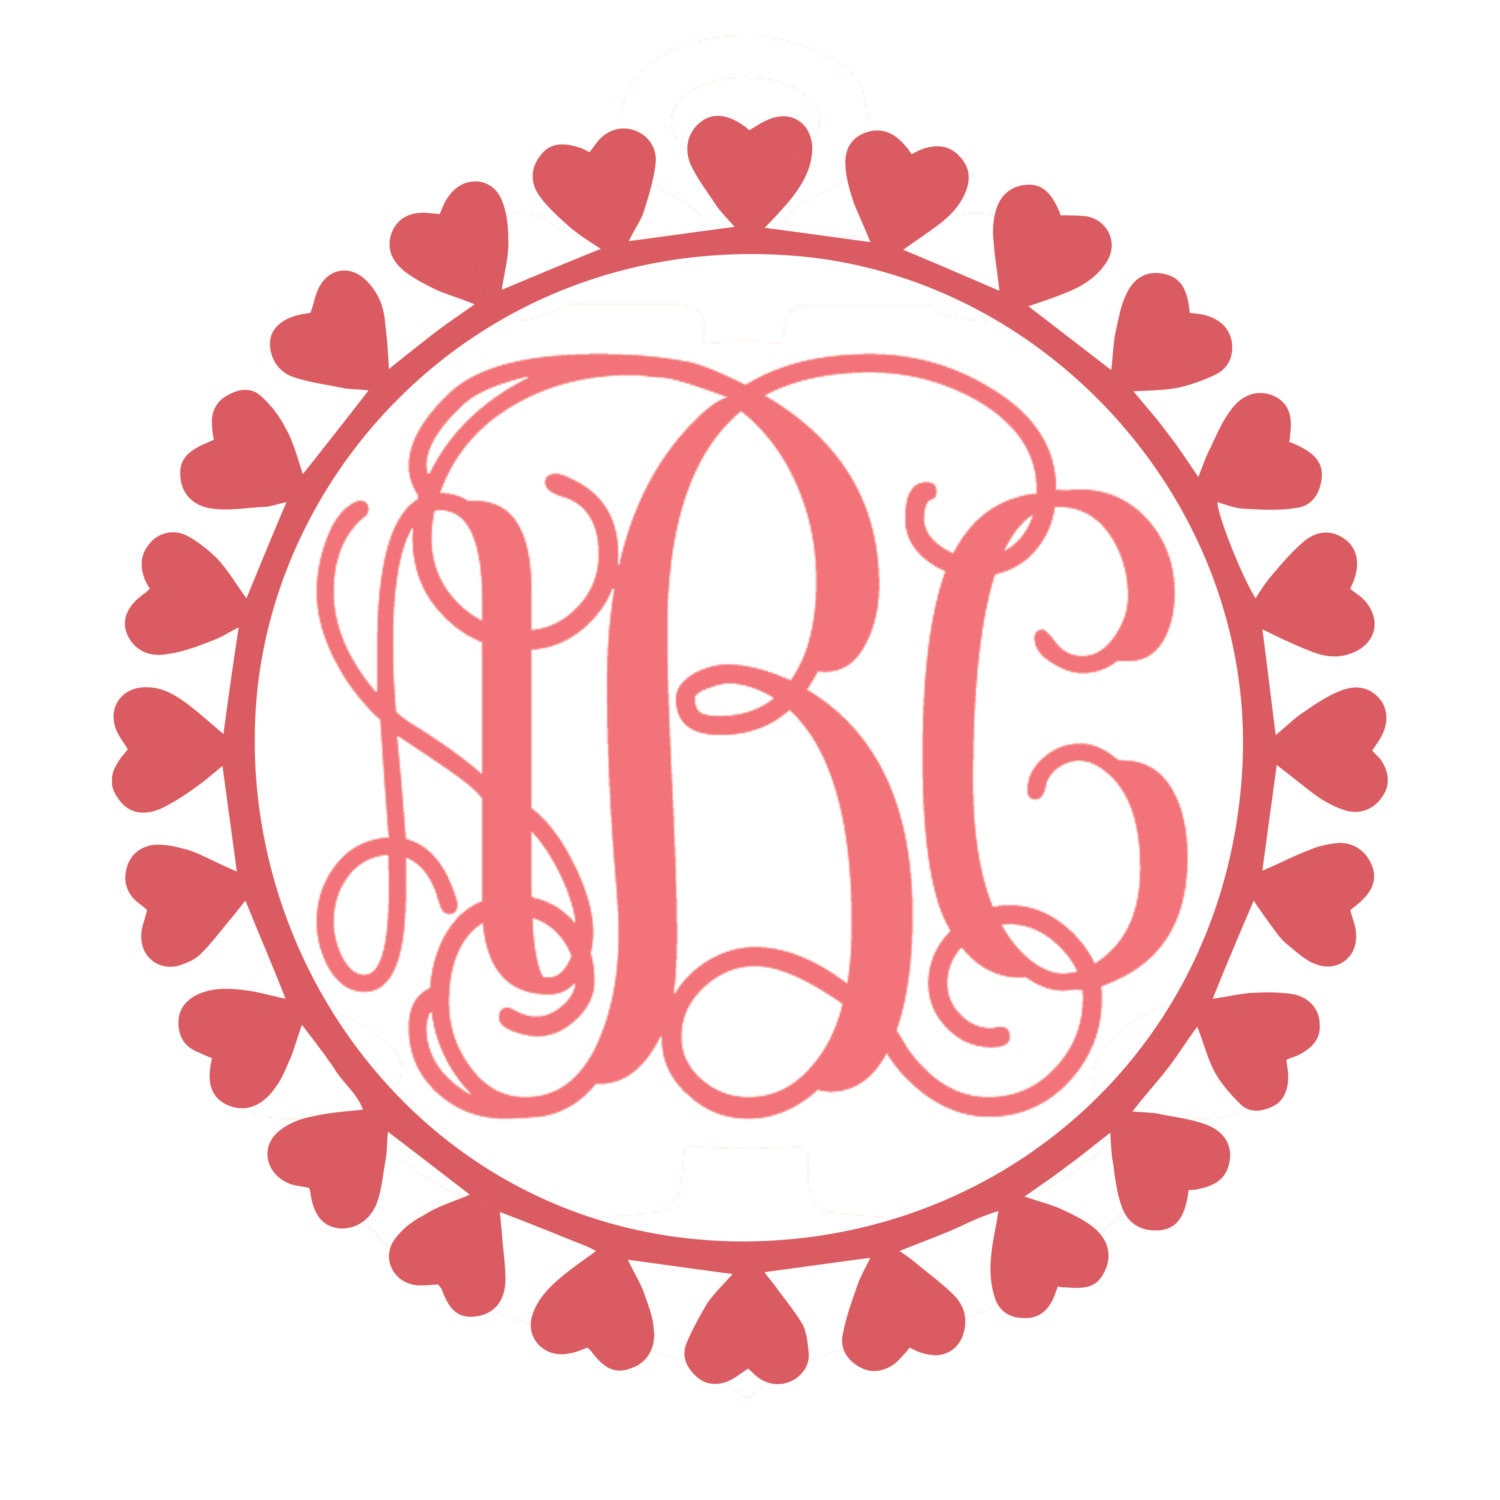 Download Heart Monogram Frame Cutting Files in Svg Eps Dxf Png and